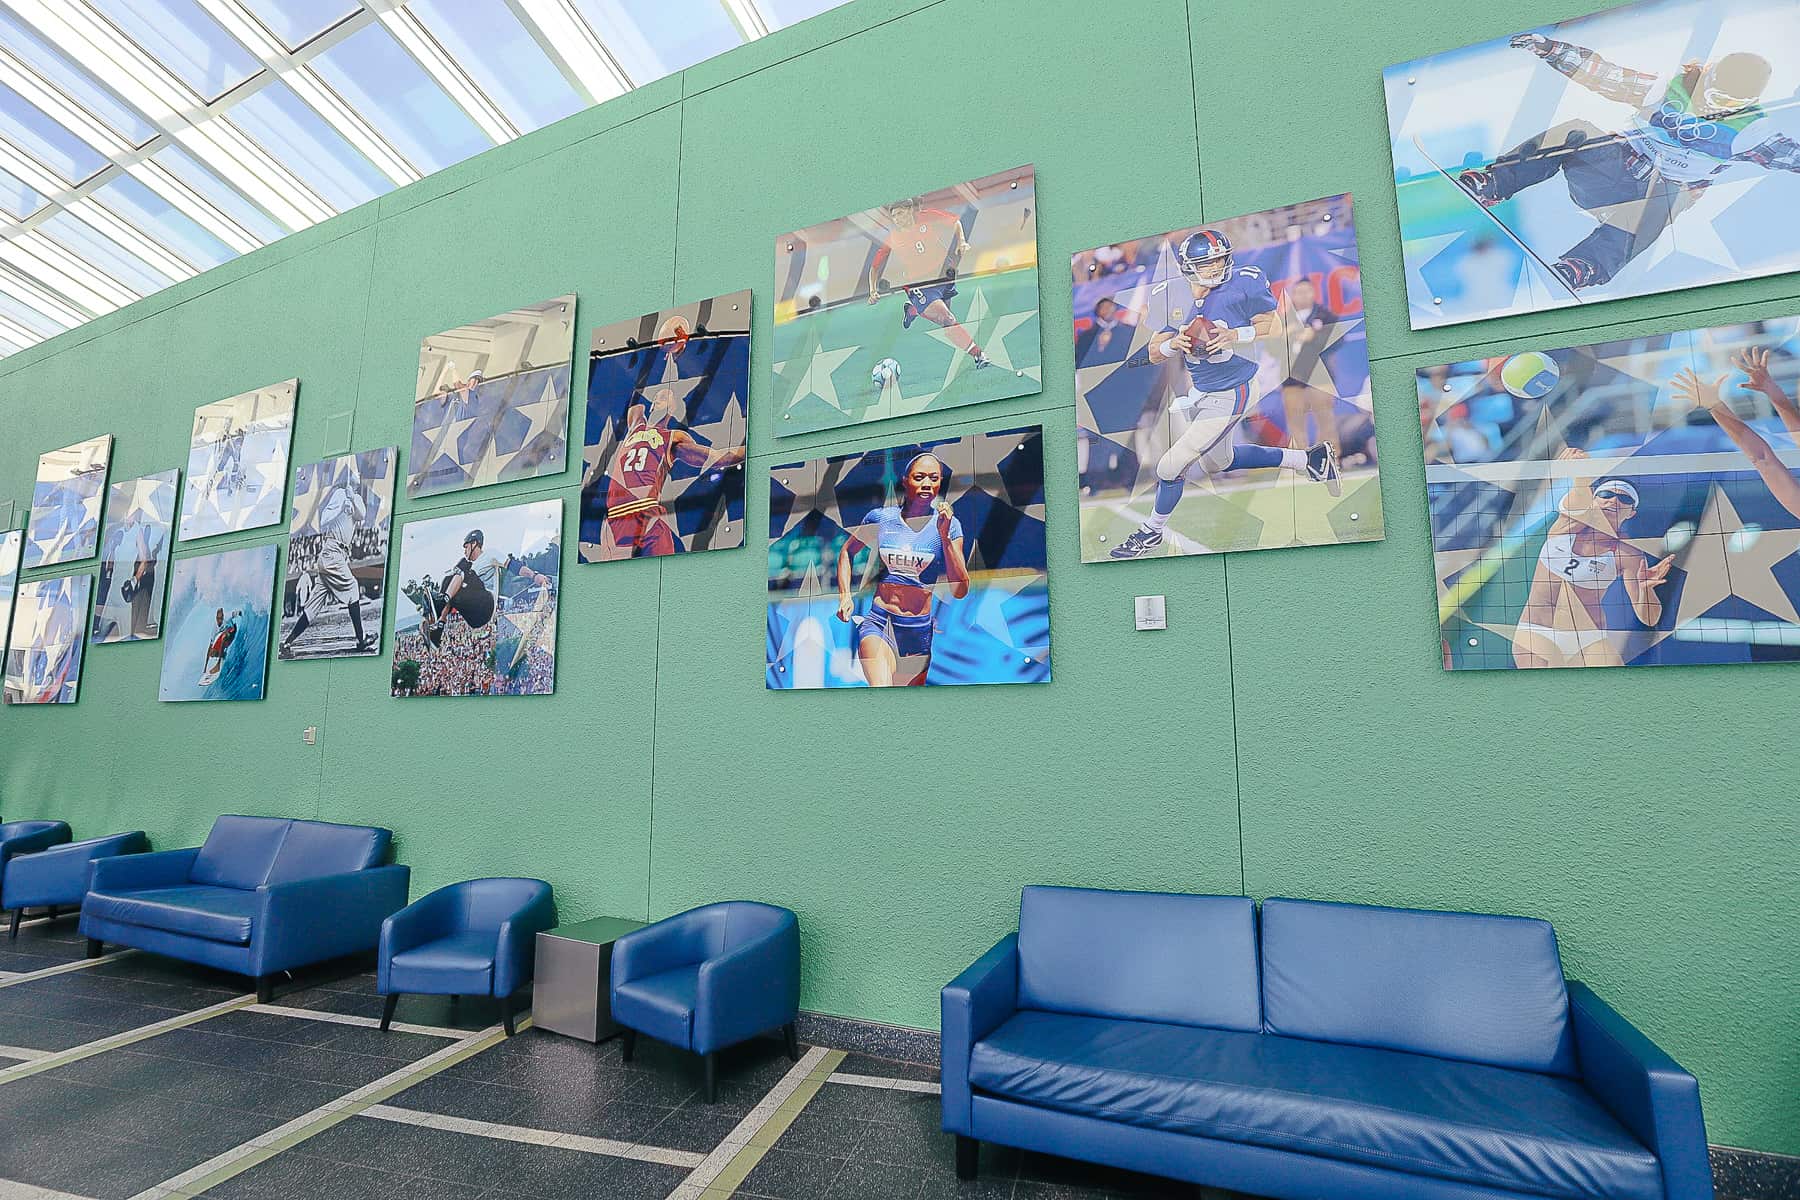 images of famous athletes in the lobby area of All-Star Sports 